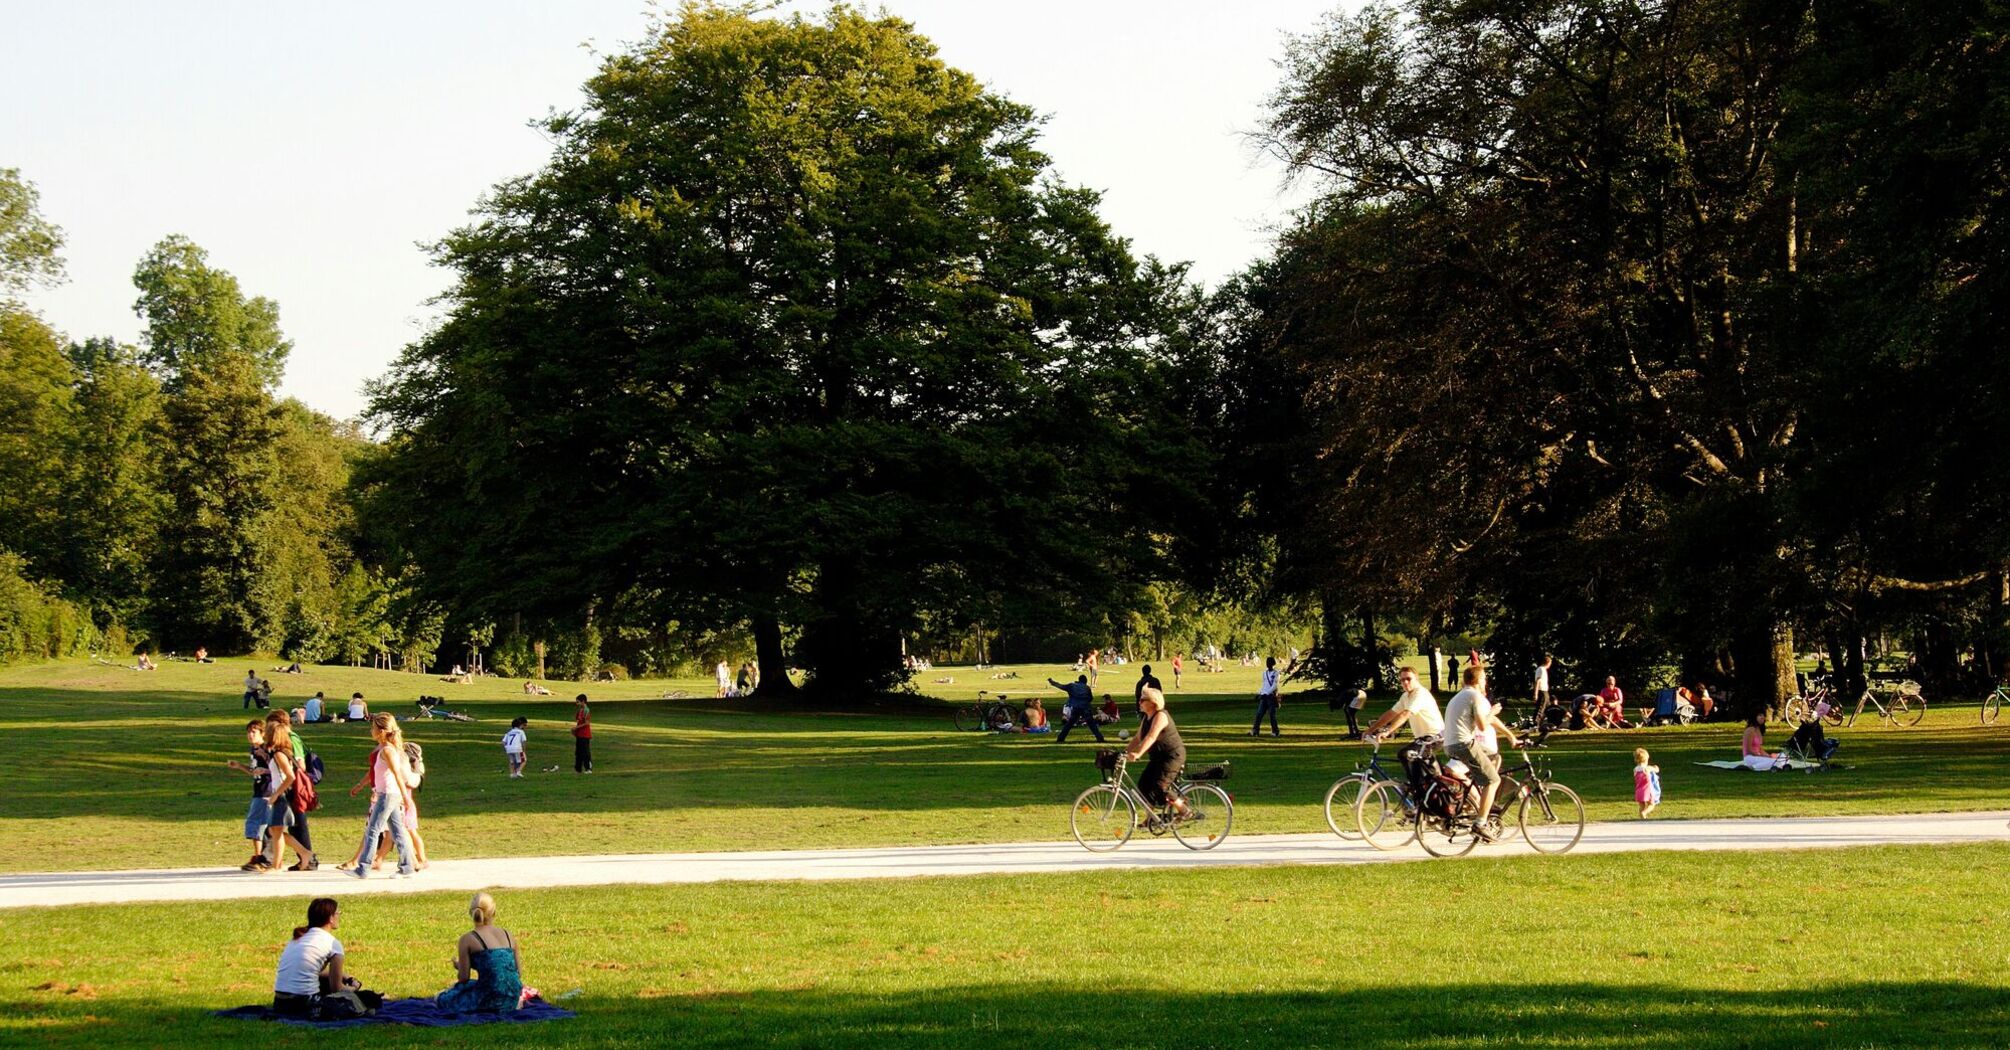 Many people enjoy the afternoon sun on the meadows of the English Garden